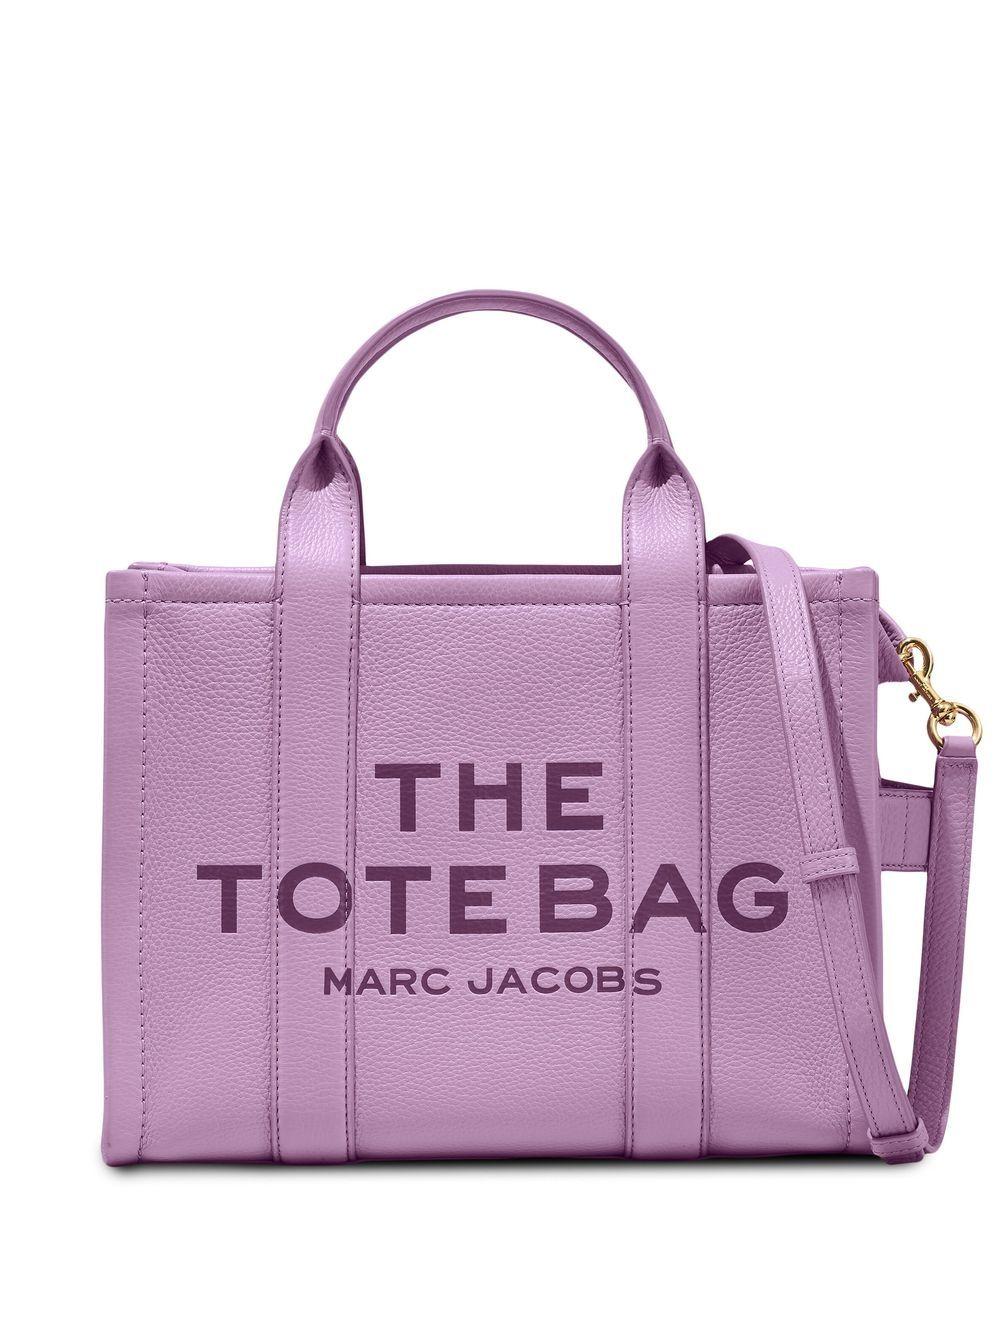 Marc Jacobs The Leather Small Tote Bag in Purple